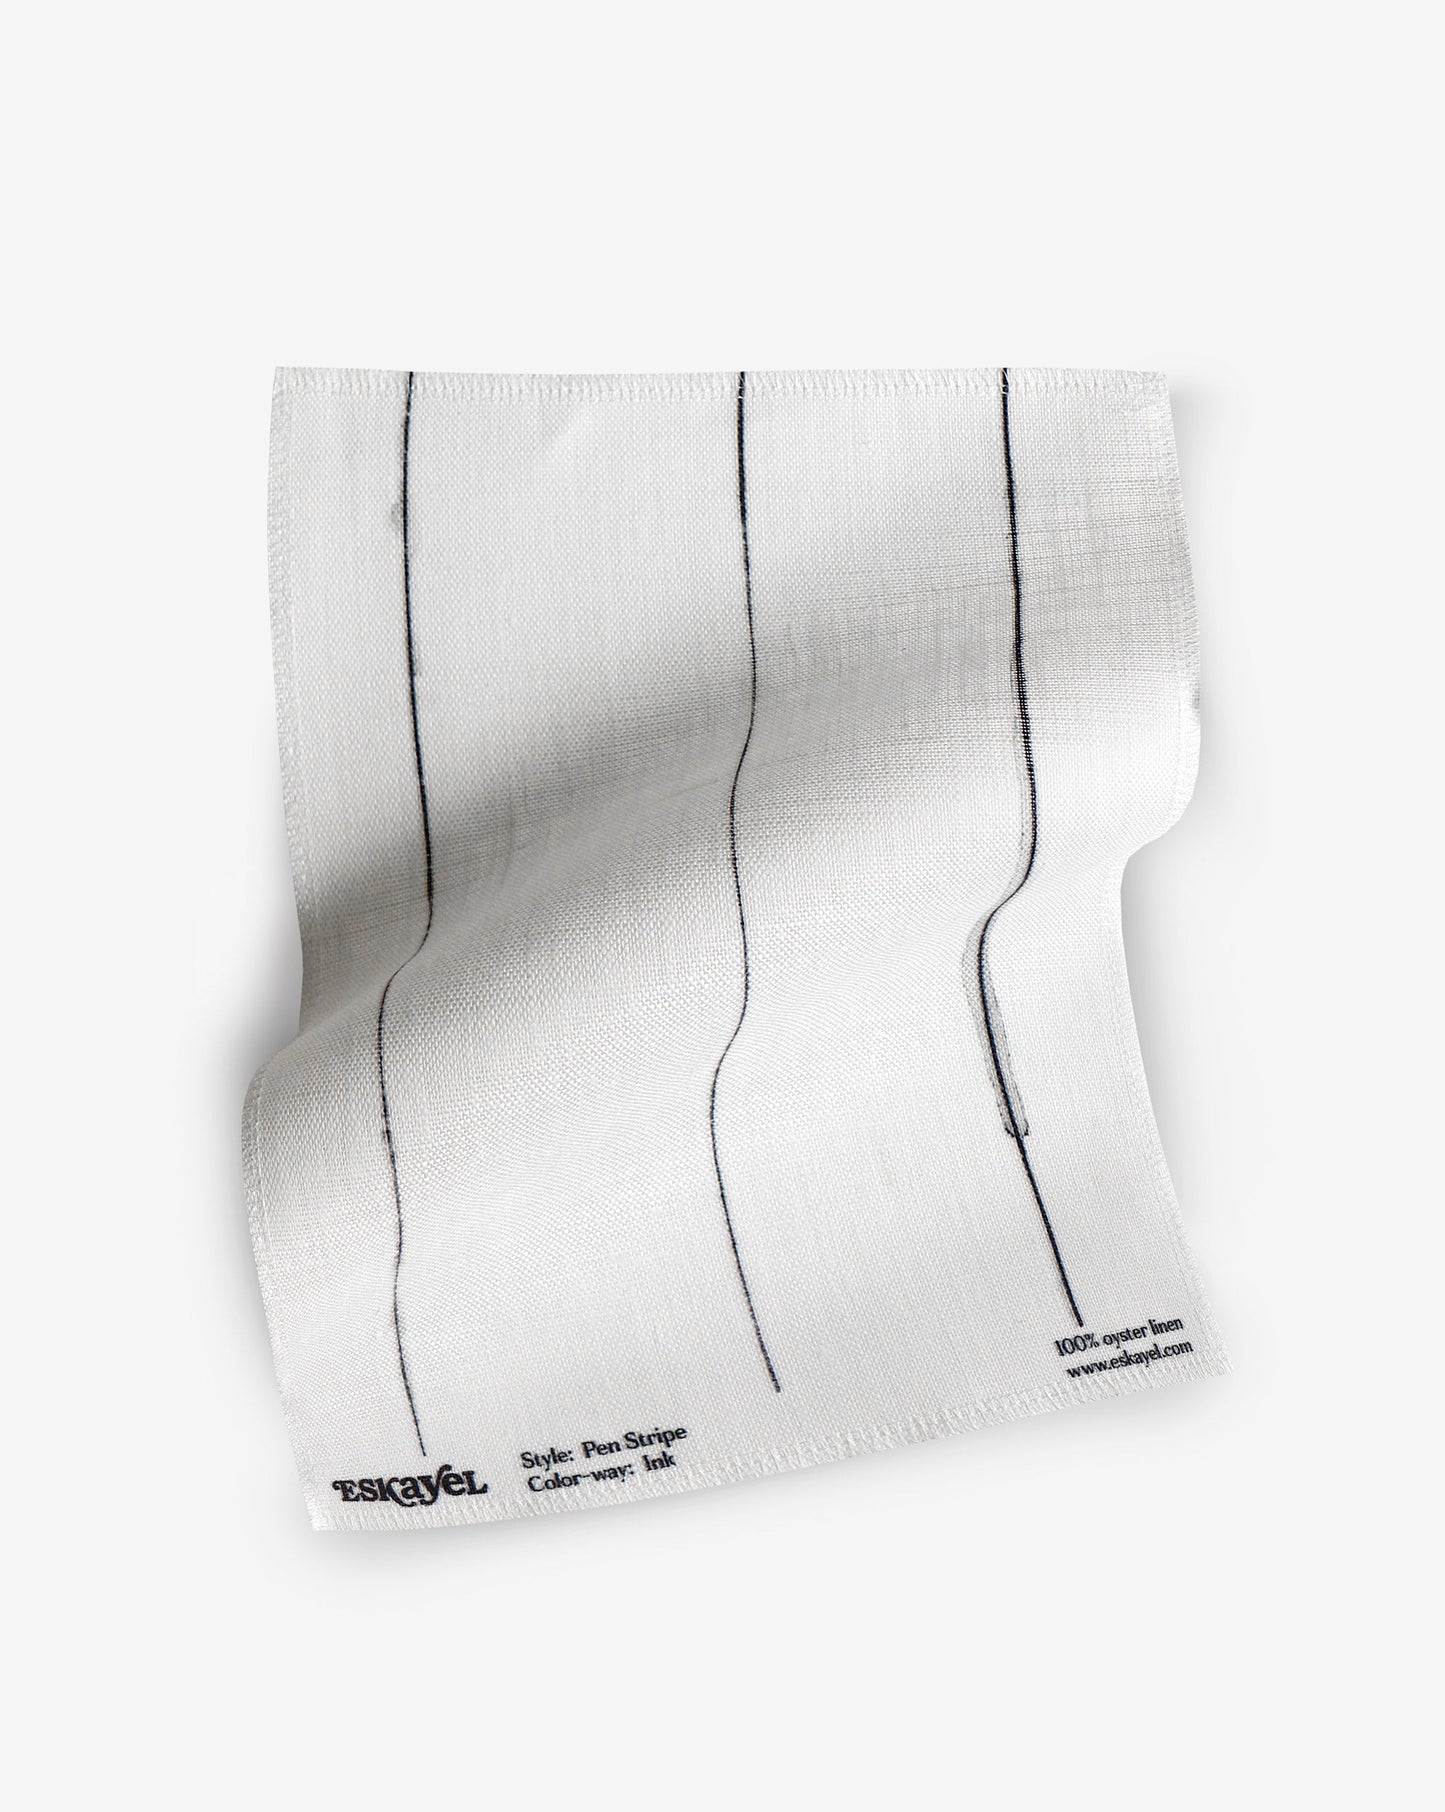 Order a white Pen Stripe Fabric Sample||Ink with a black stripe on it.